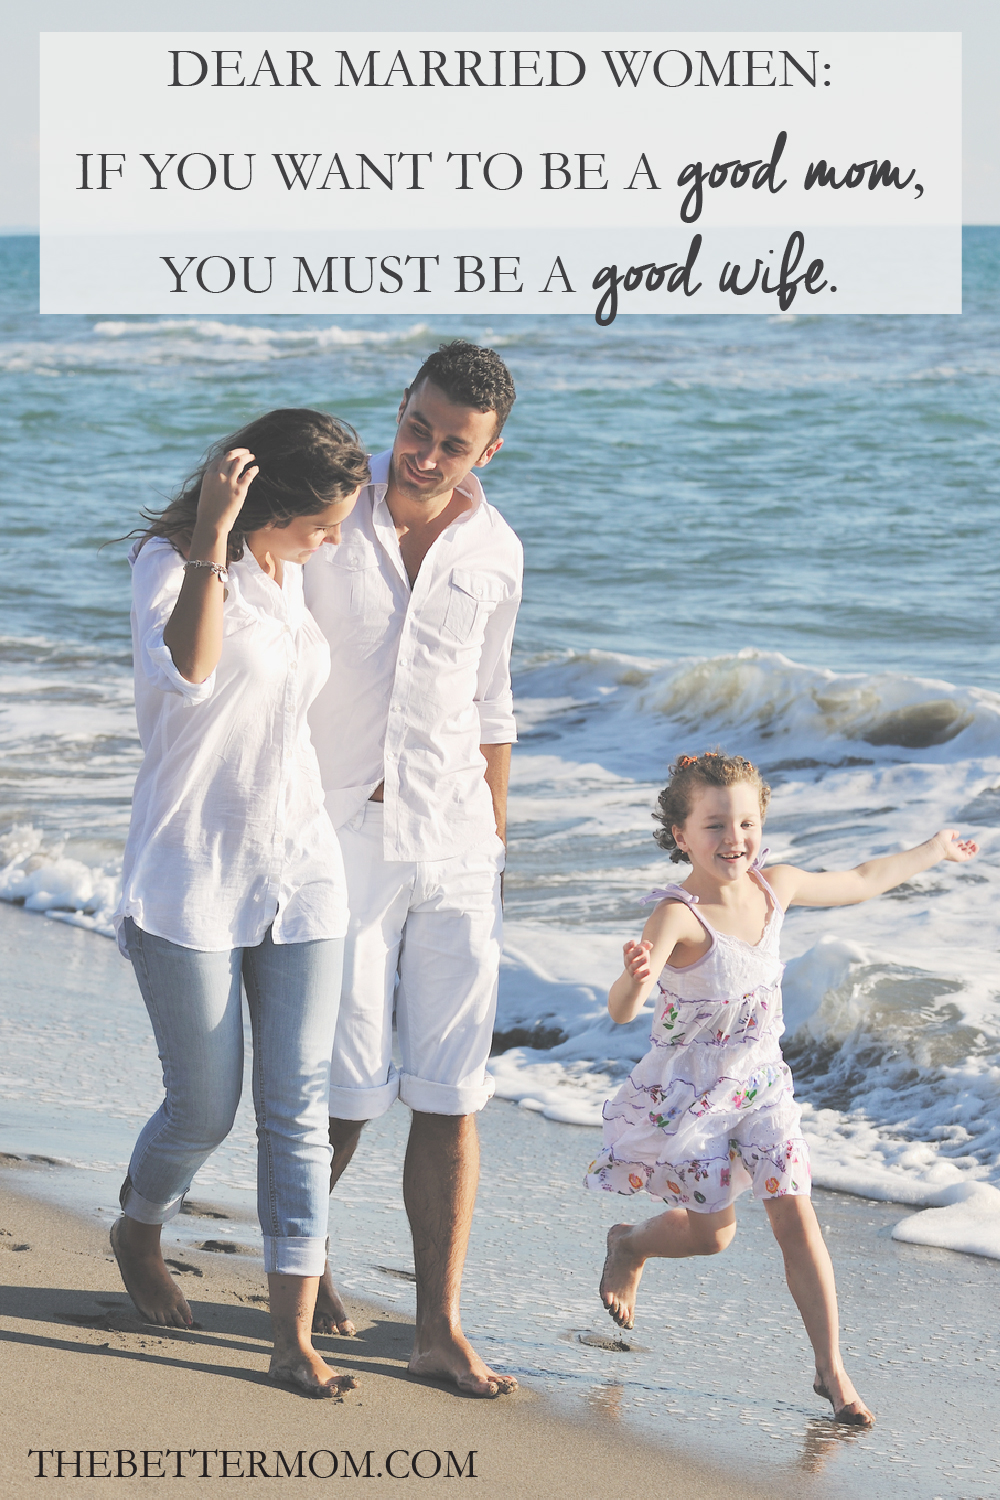 How To Be A Good Wife And Mother? 